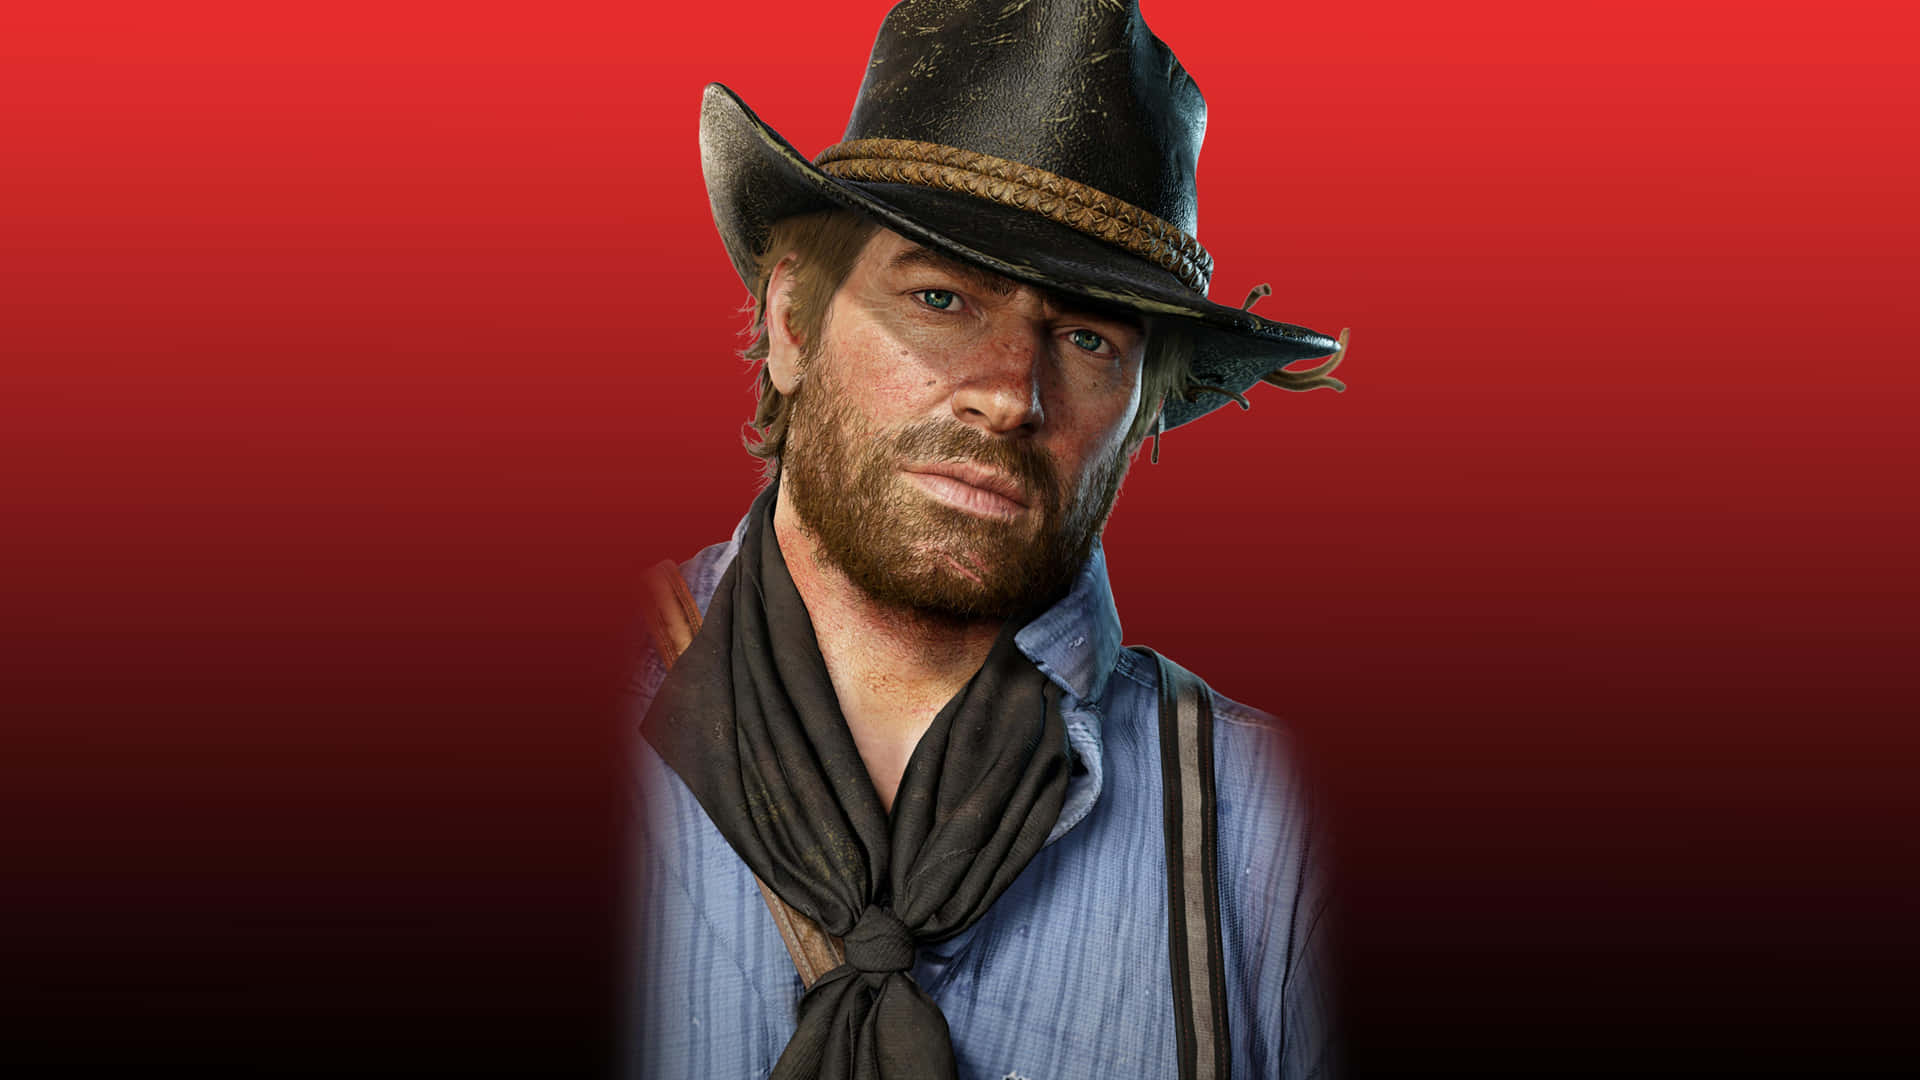 A Man In A Cowboy Hat And Scarf Wallpaper